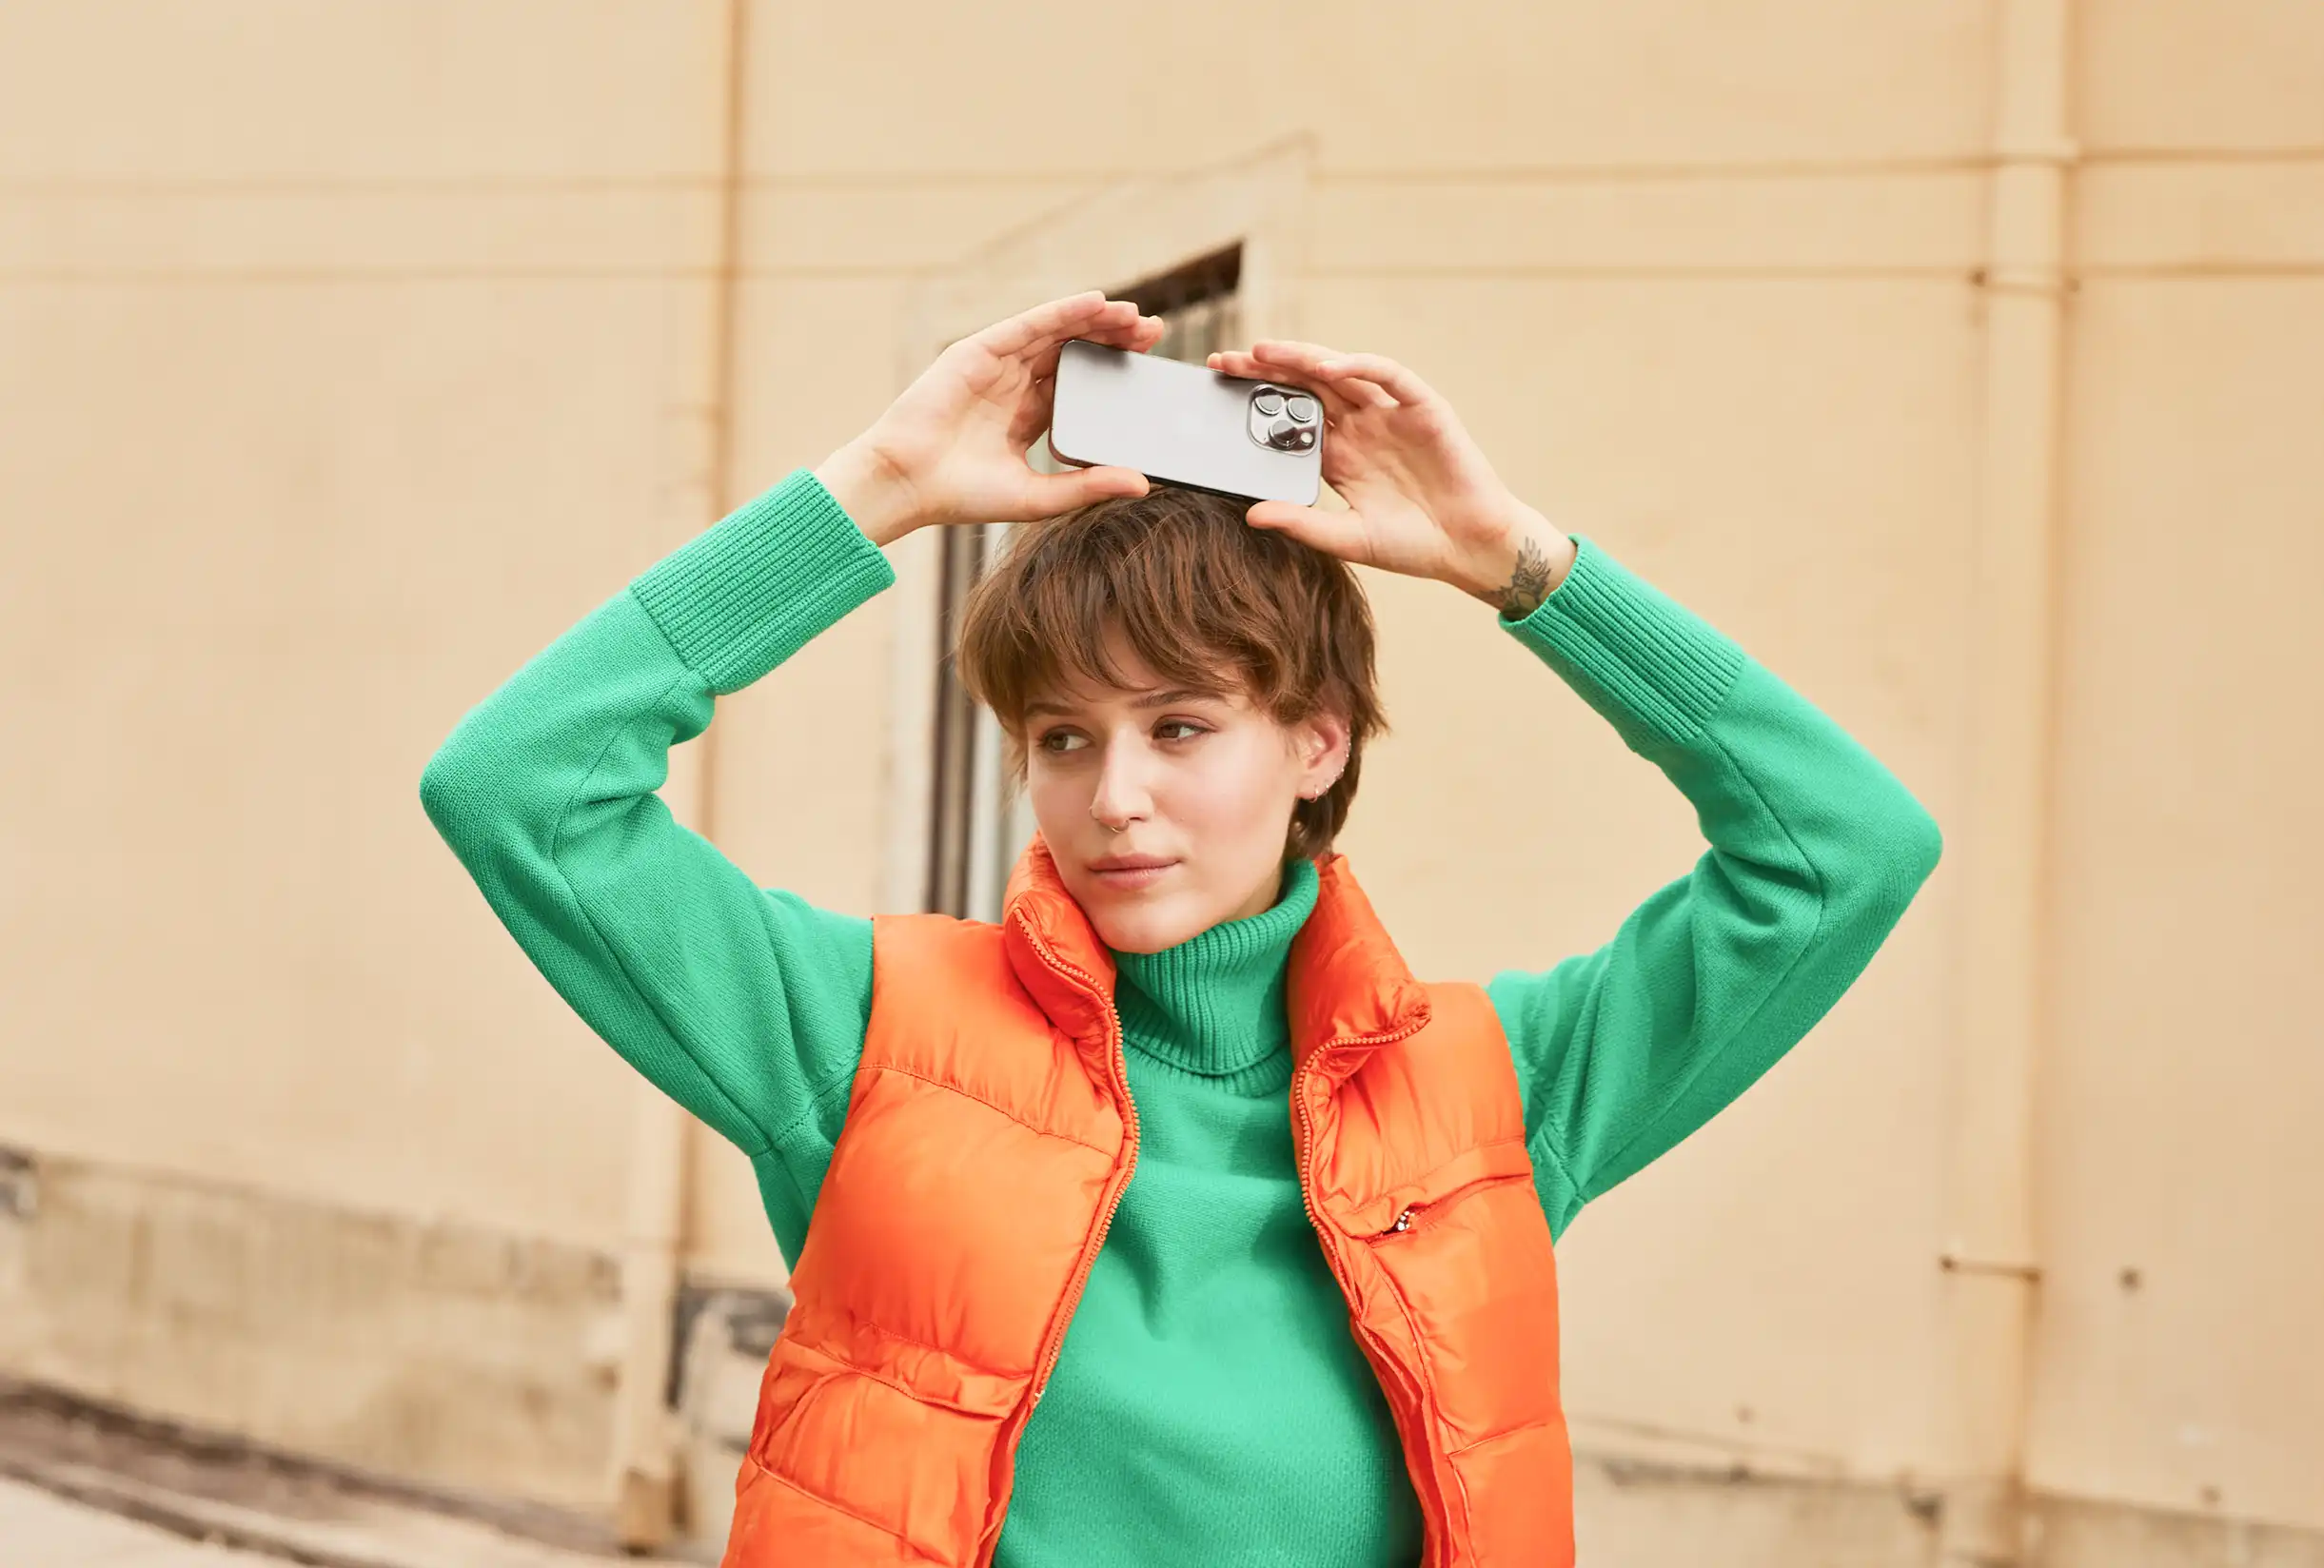 Women with a green pullover and an orange sleeveless jacket who held up her phone above her head